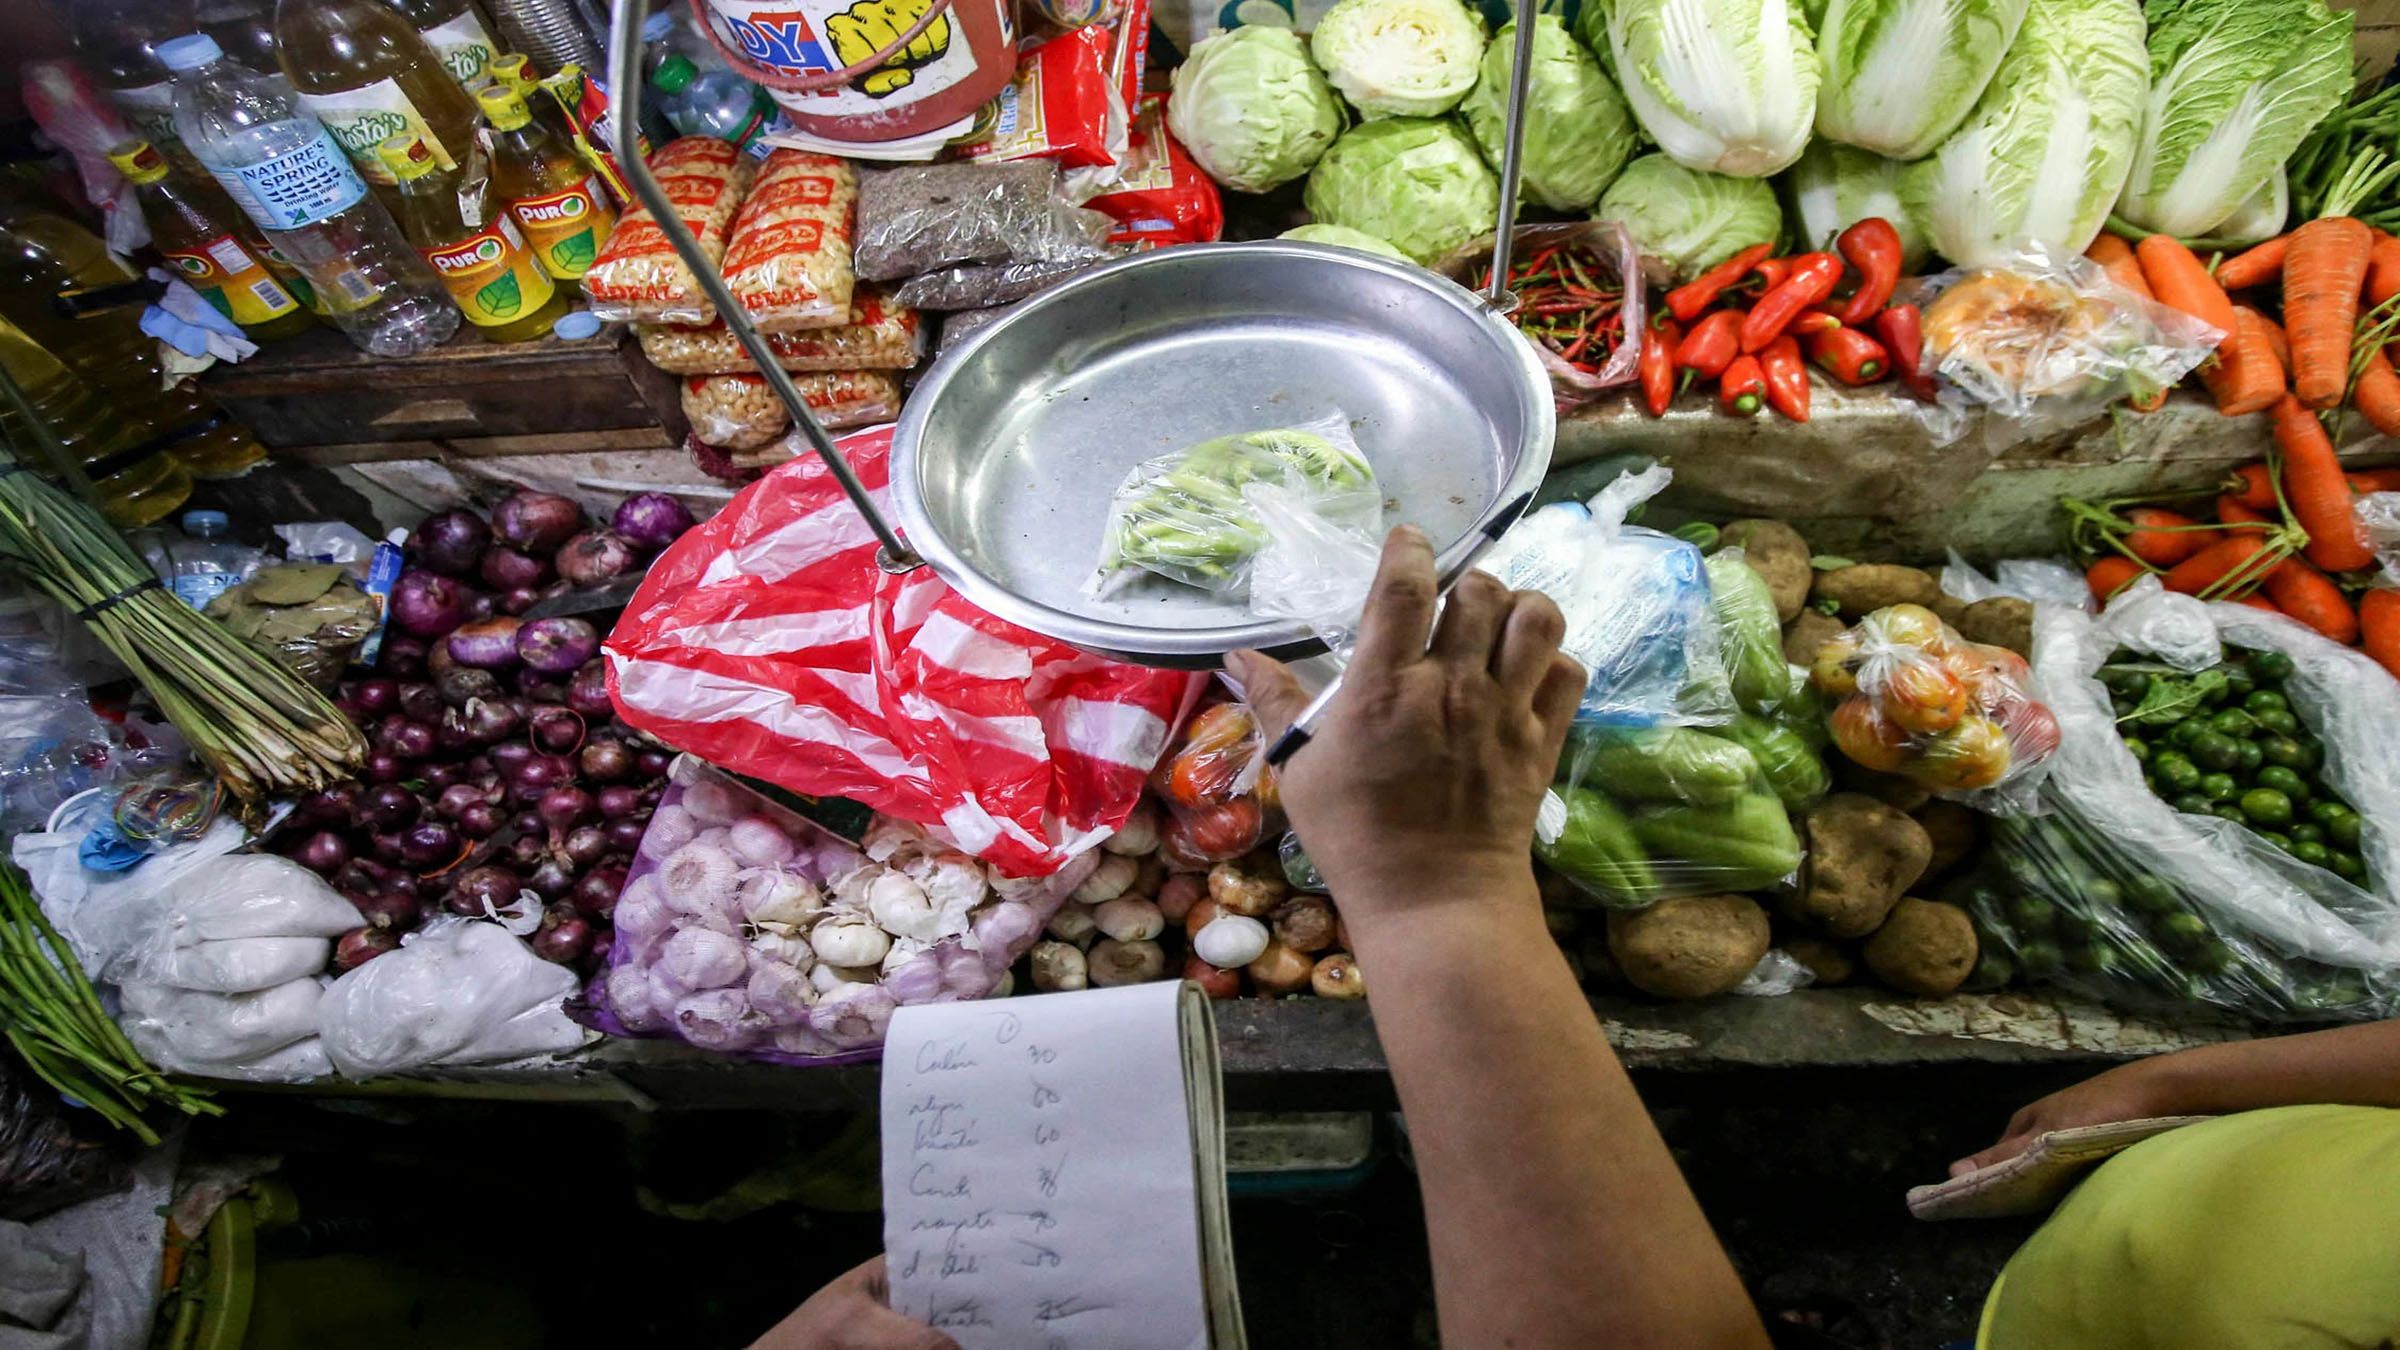 Shortage of food items to aggravate inflation uptick